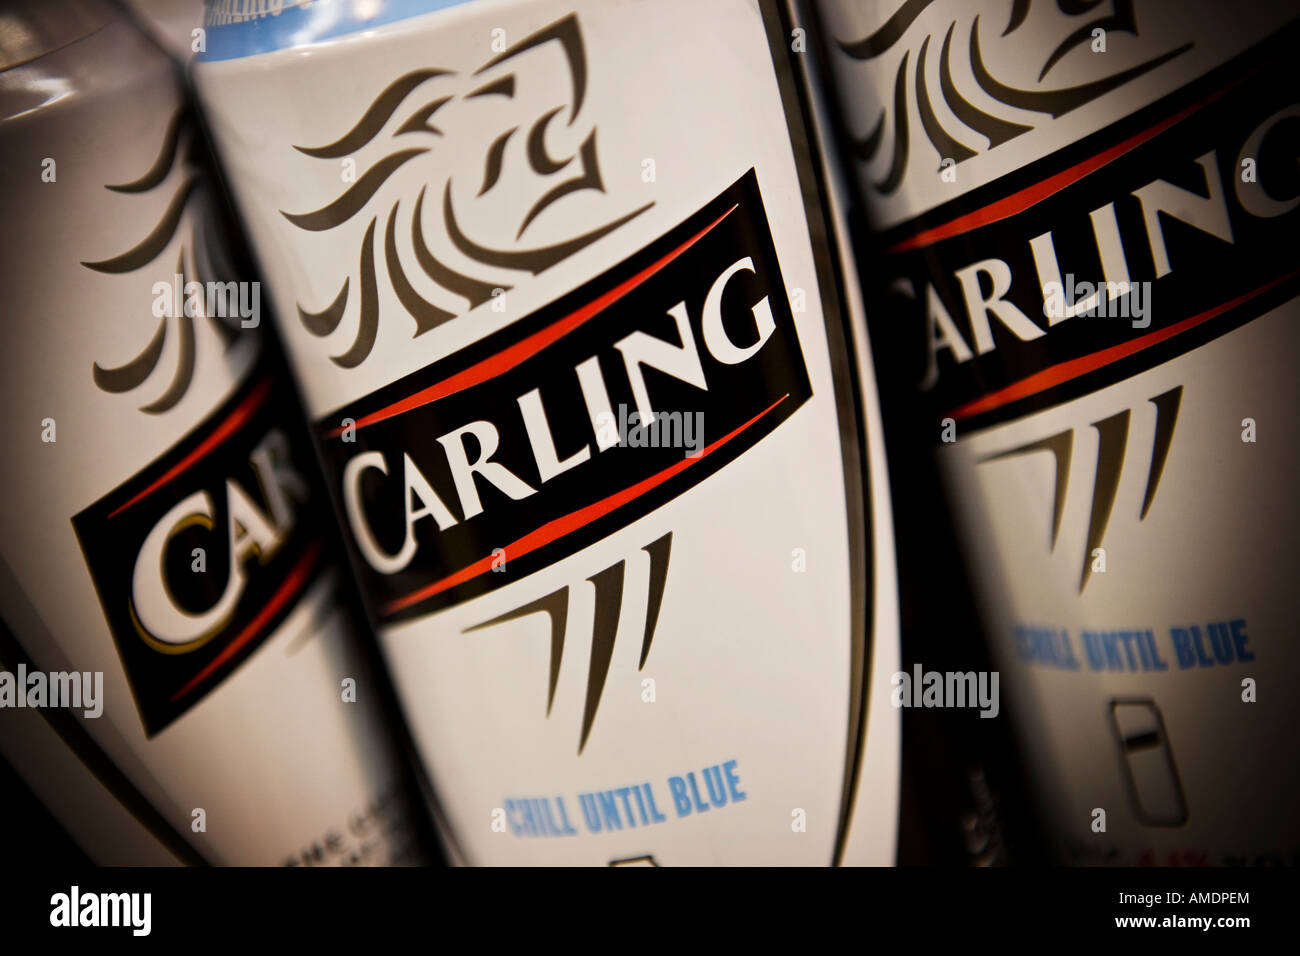 Cans of Carling lager Carling is a Molson Coors Brewing Company brand Stock Photo